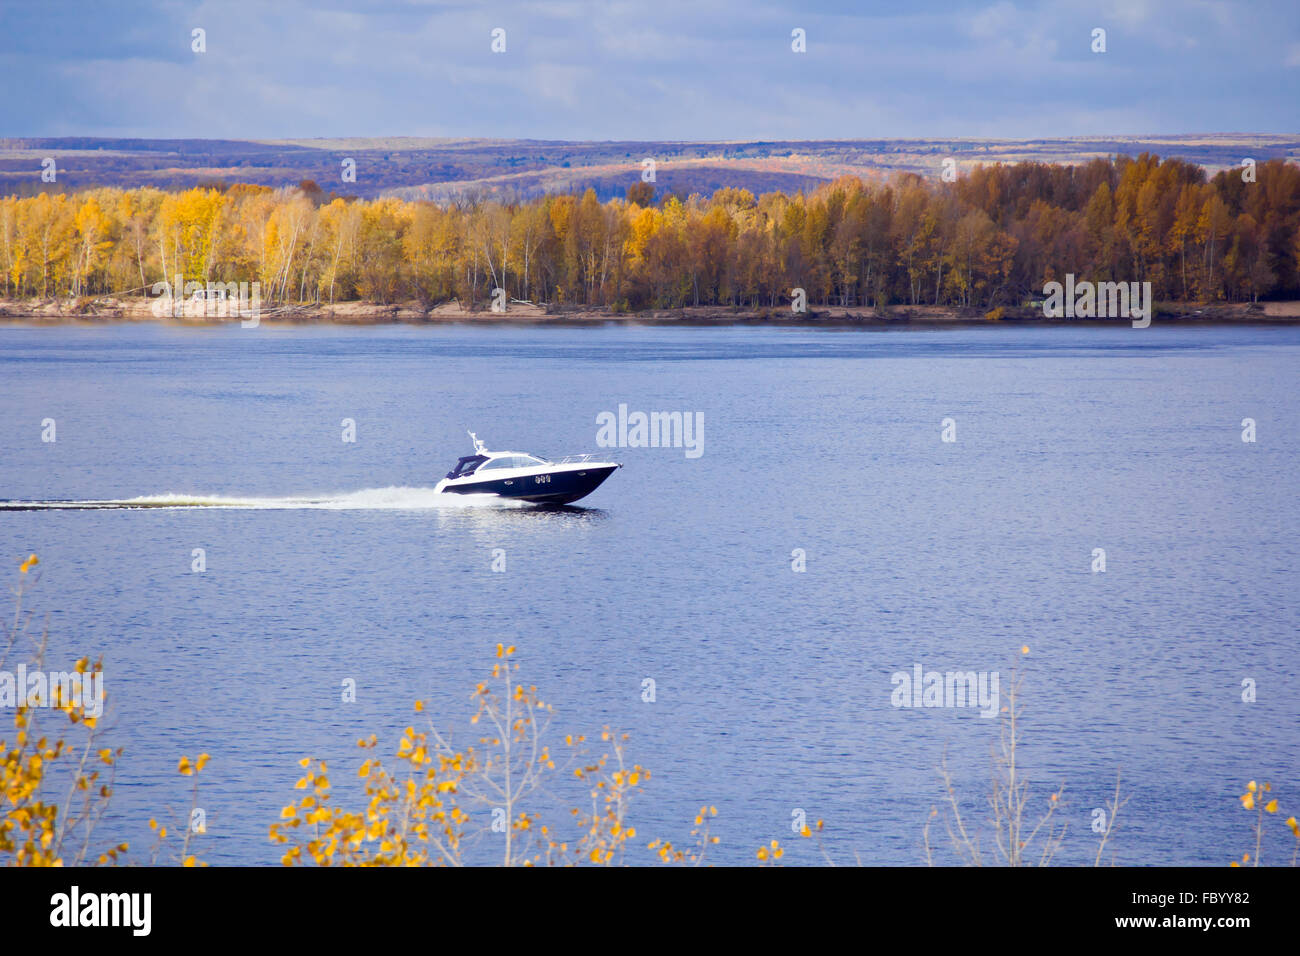 Autumn landscape with river Stock Photo